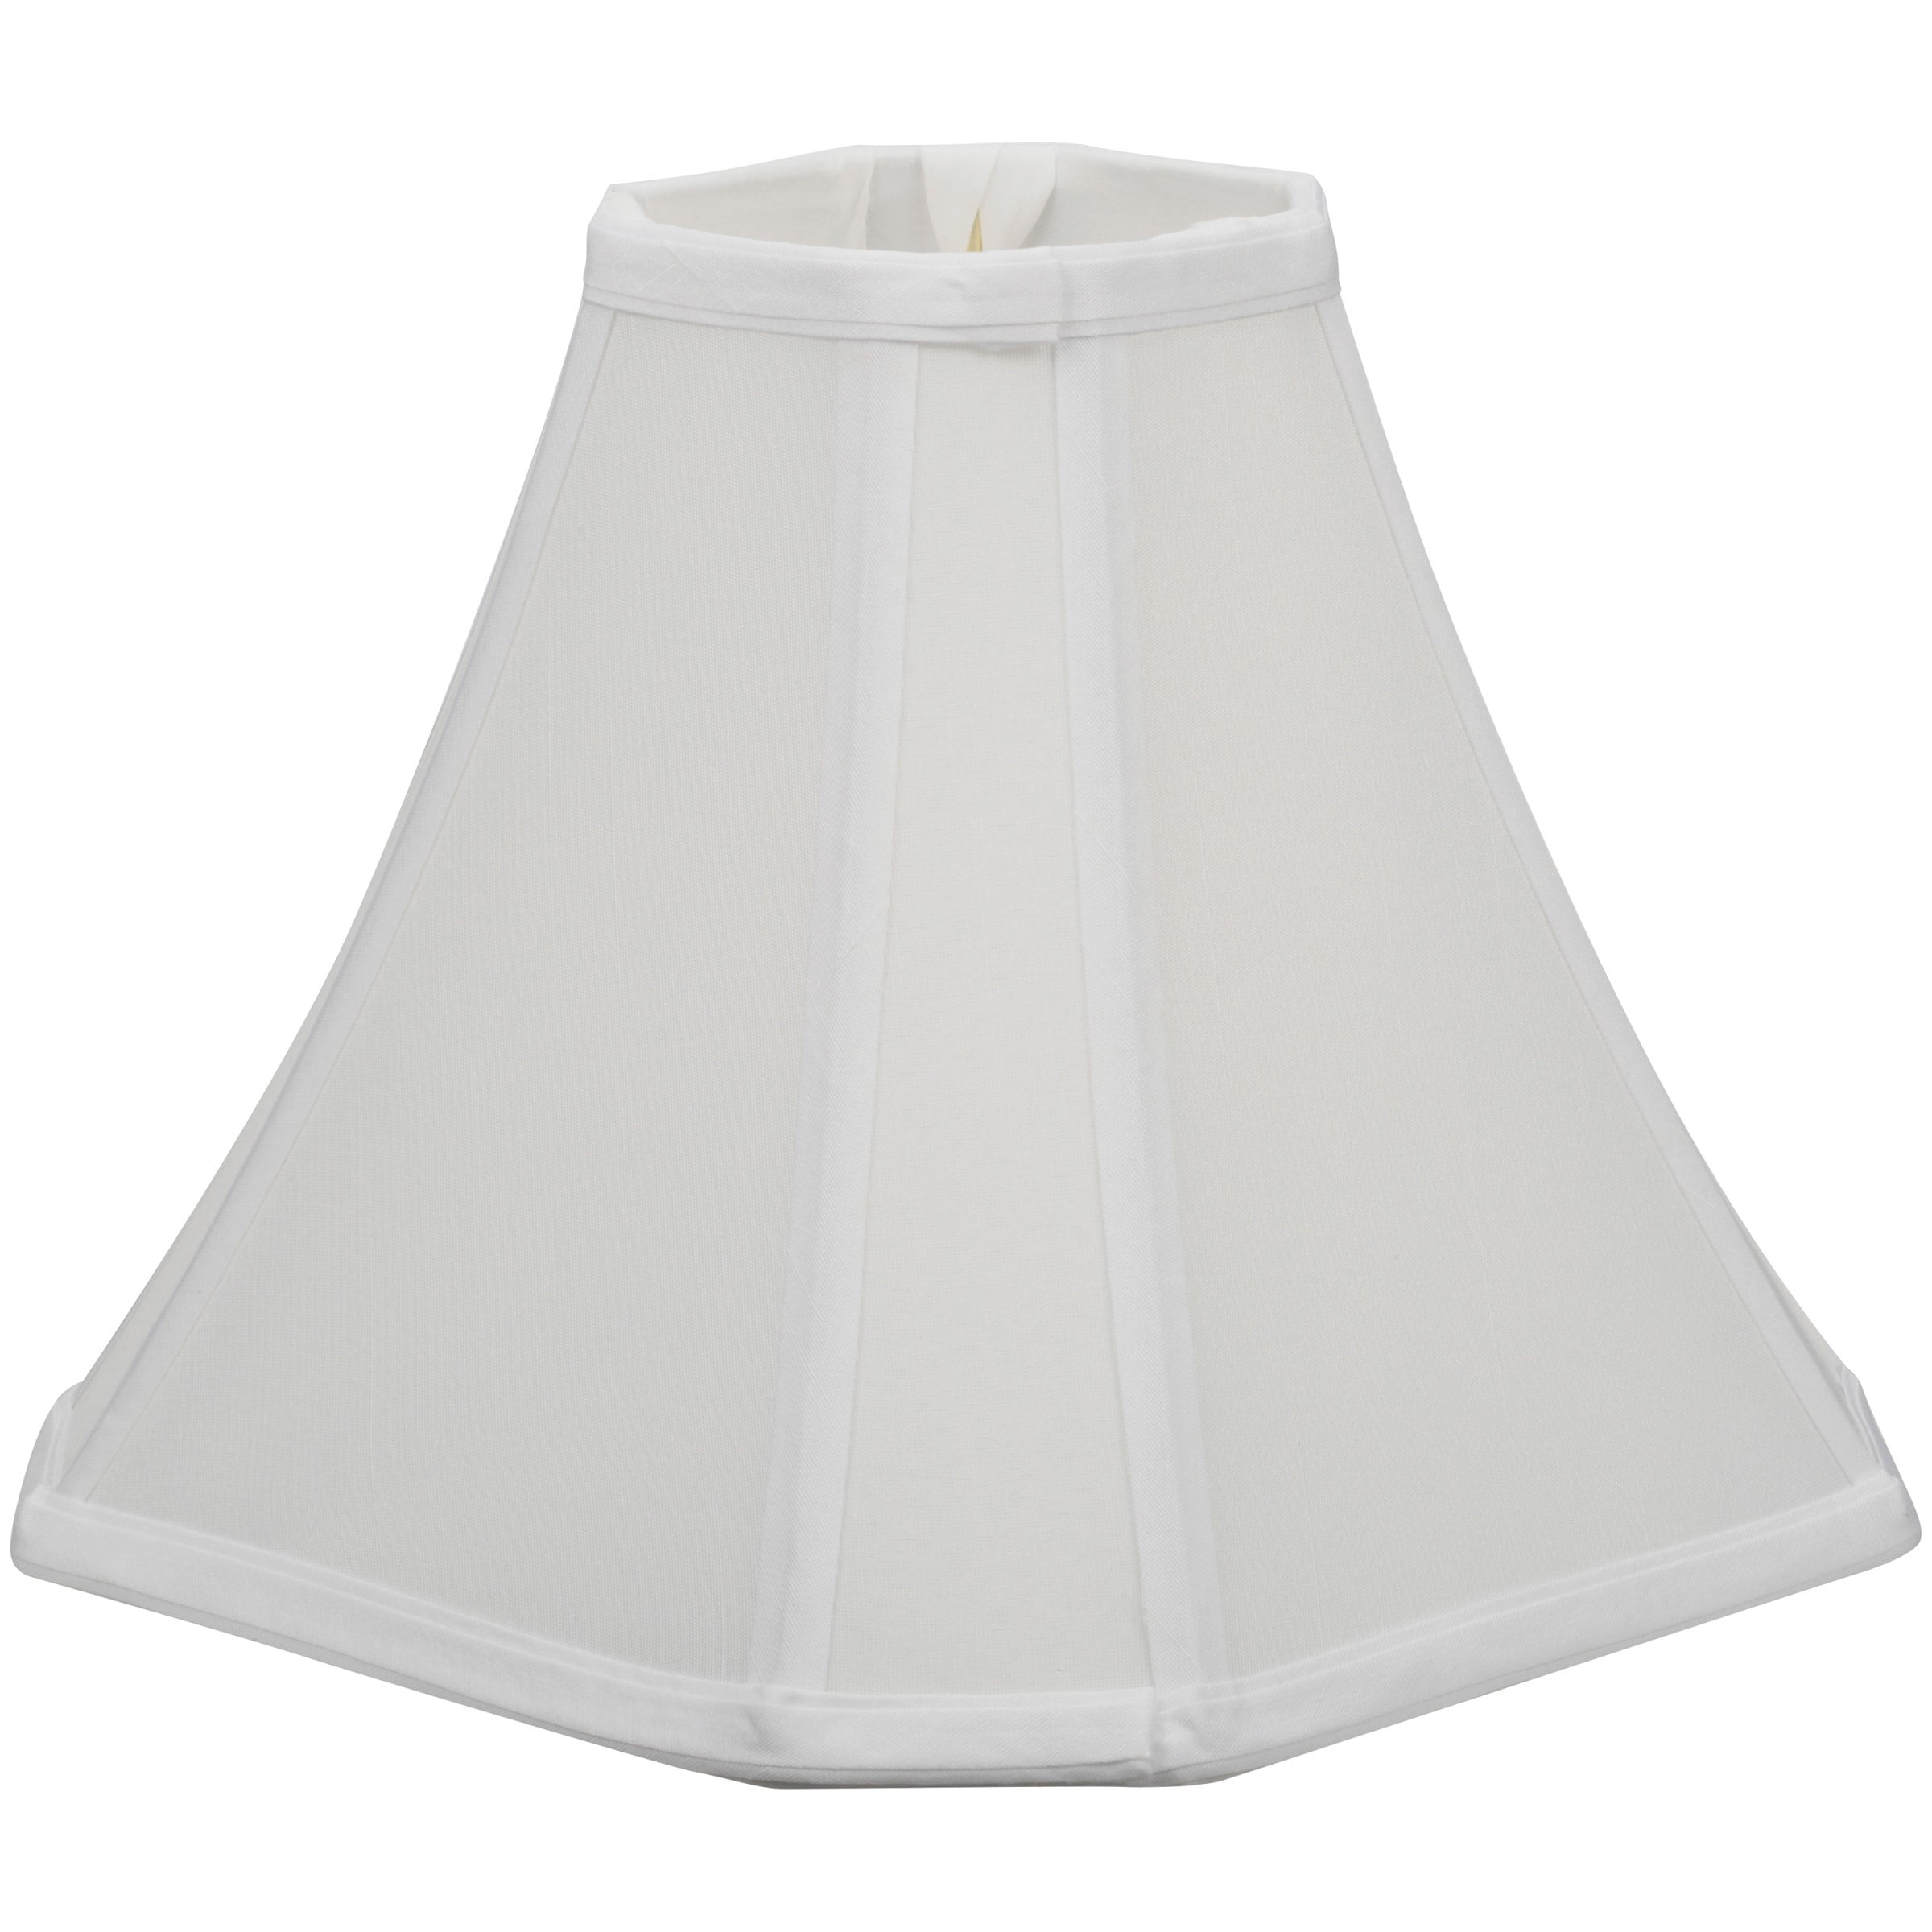 New white lampshades square cut corner bell 